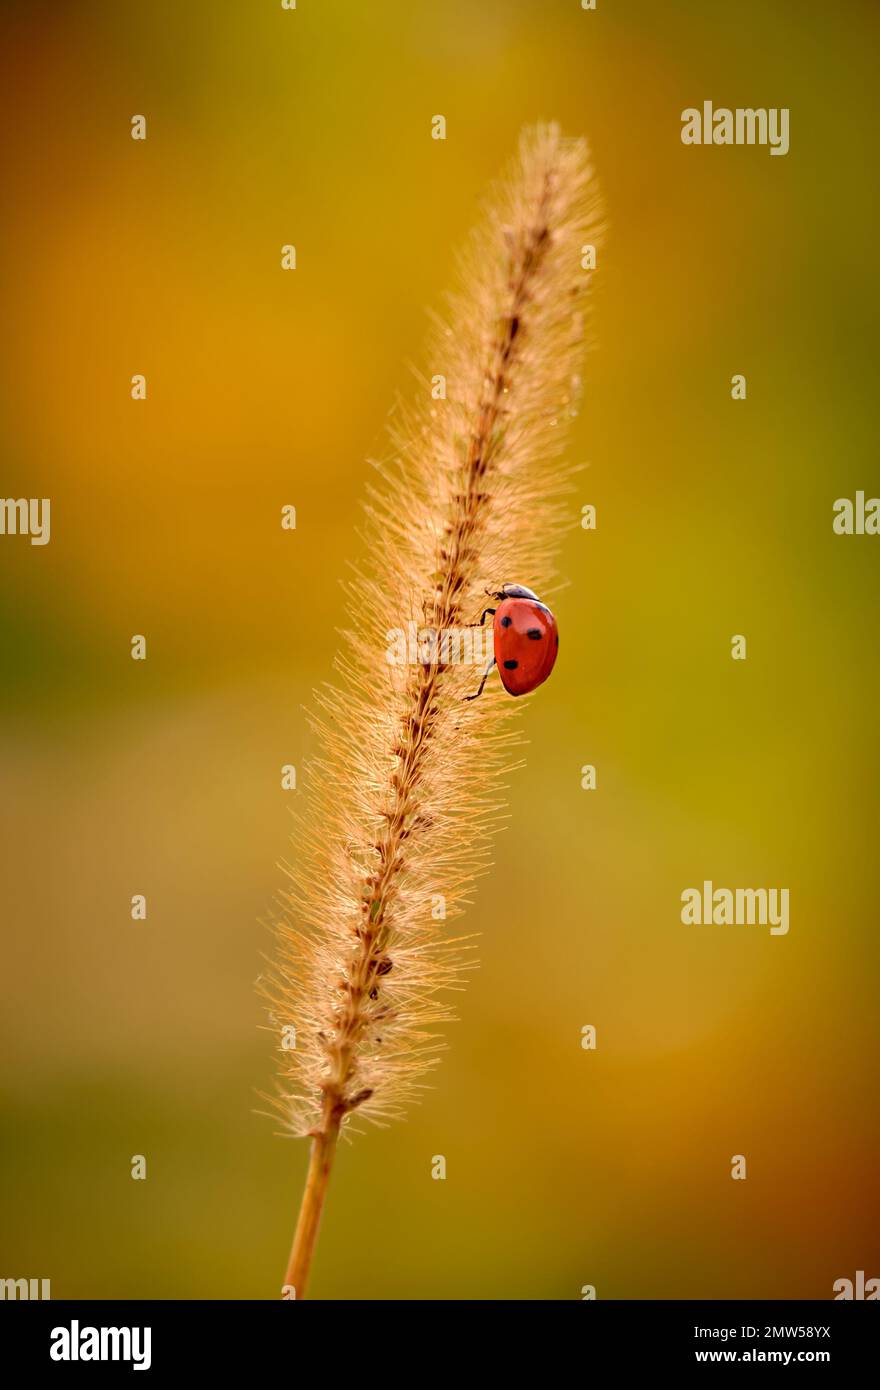 Small red ladybug on a plant against blurred background Stock Photo